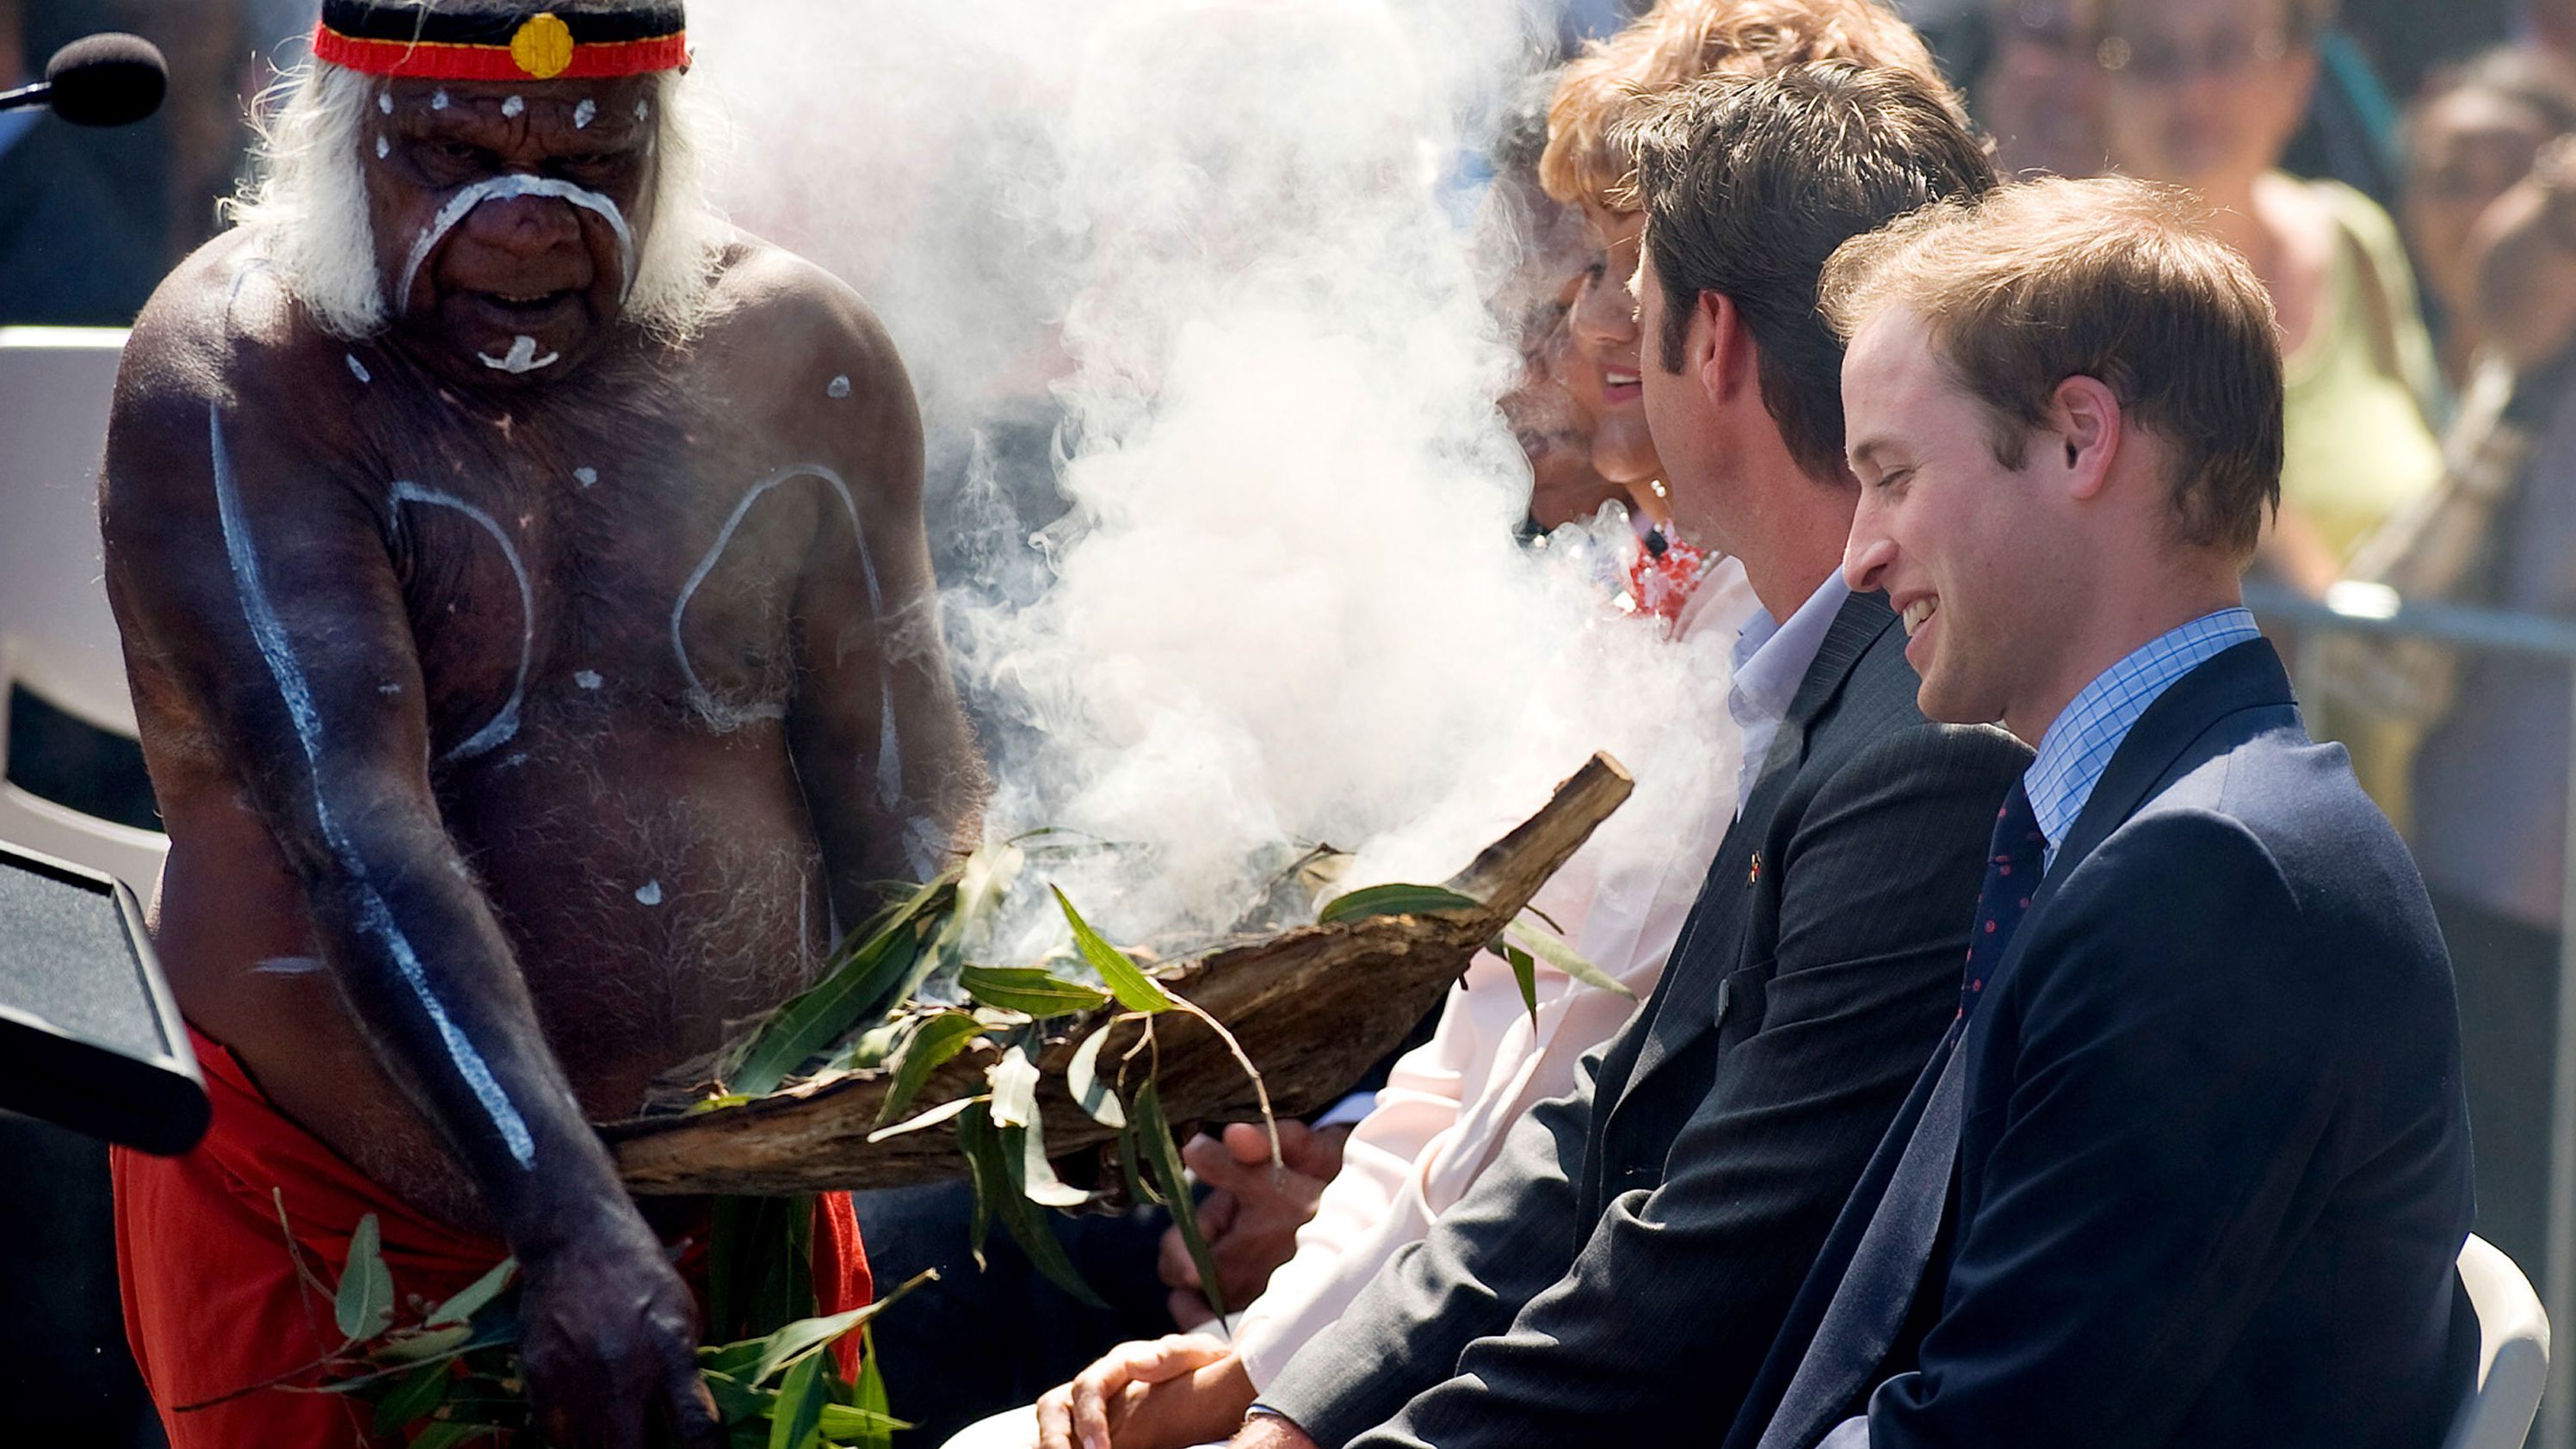 During an official overseas visit in 2010, Prince William is welcomed to Sydney with a traditional smoke ceremony.